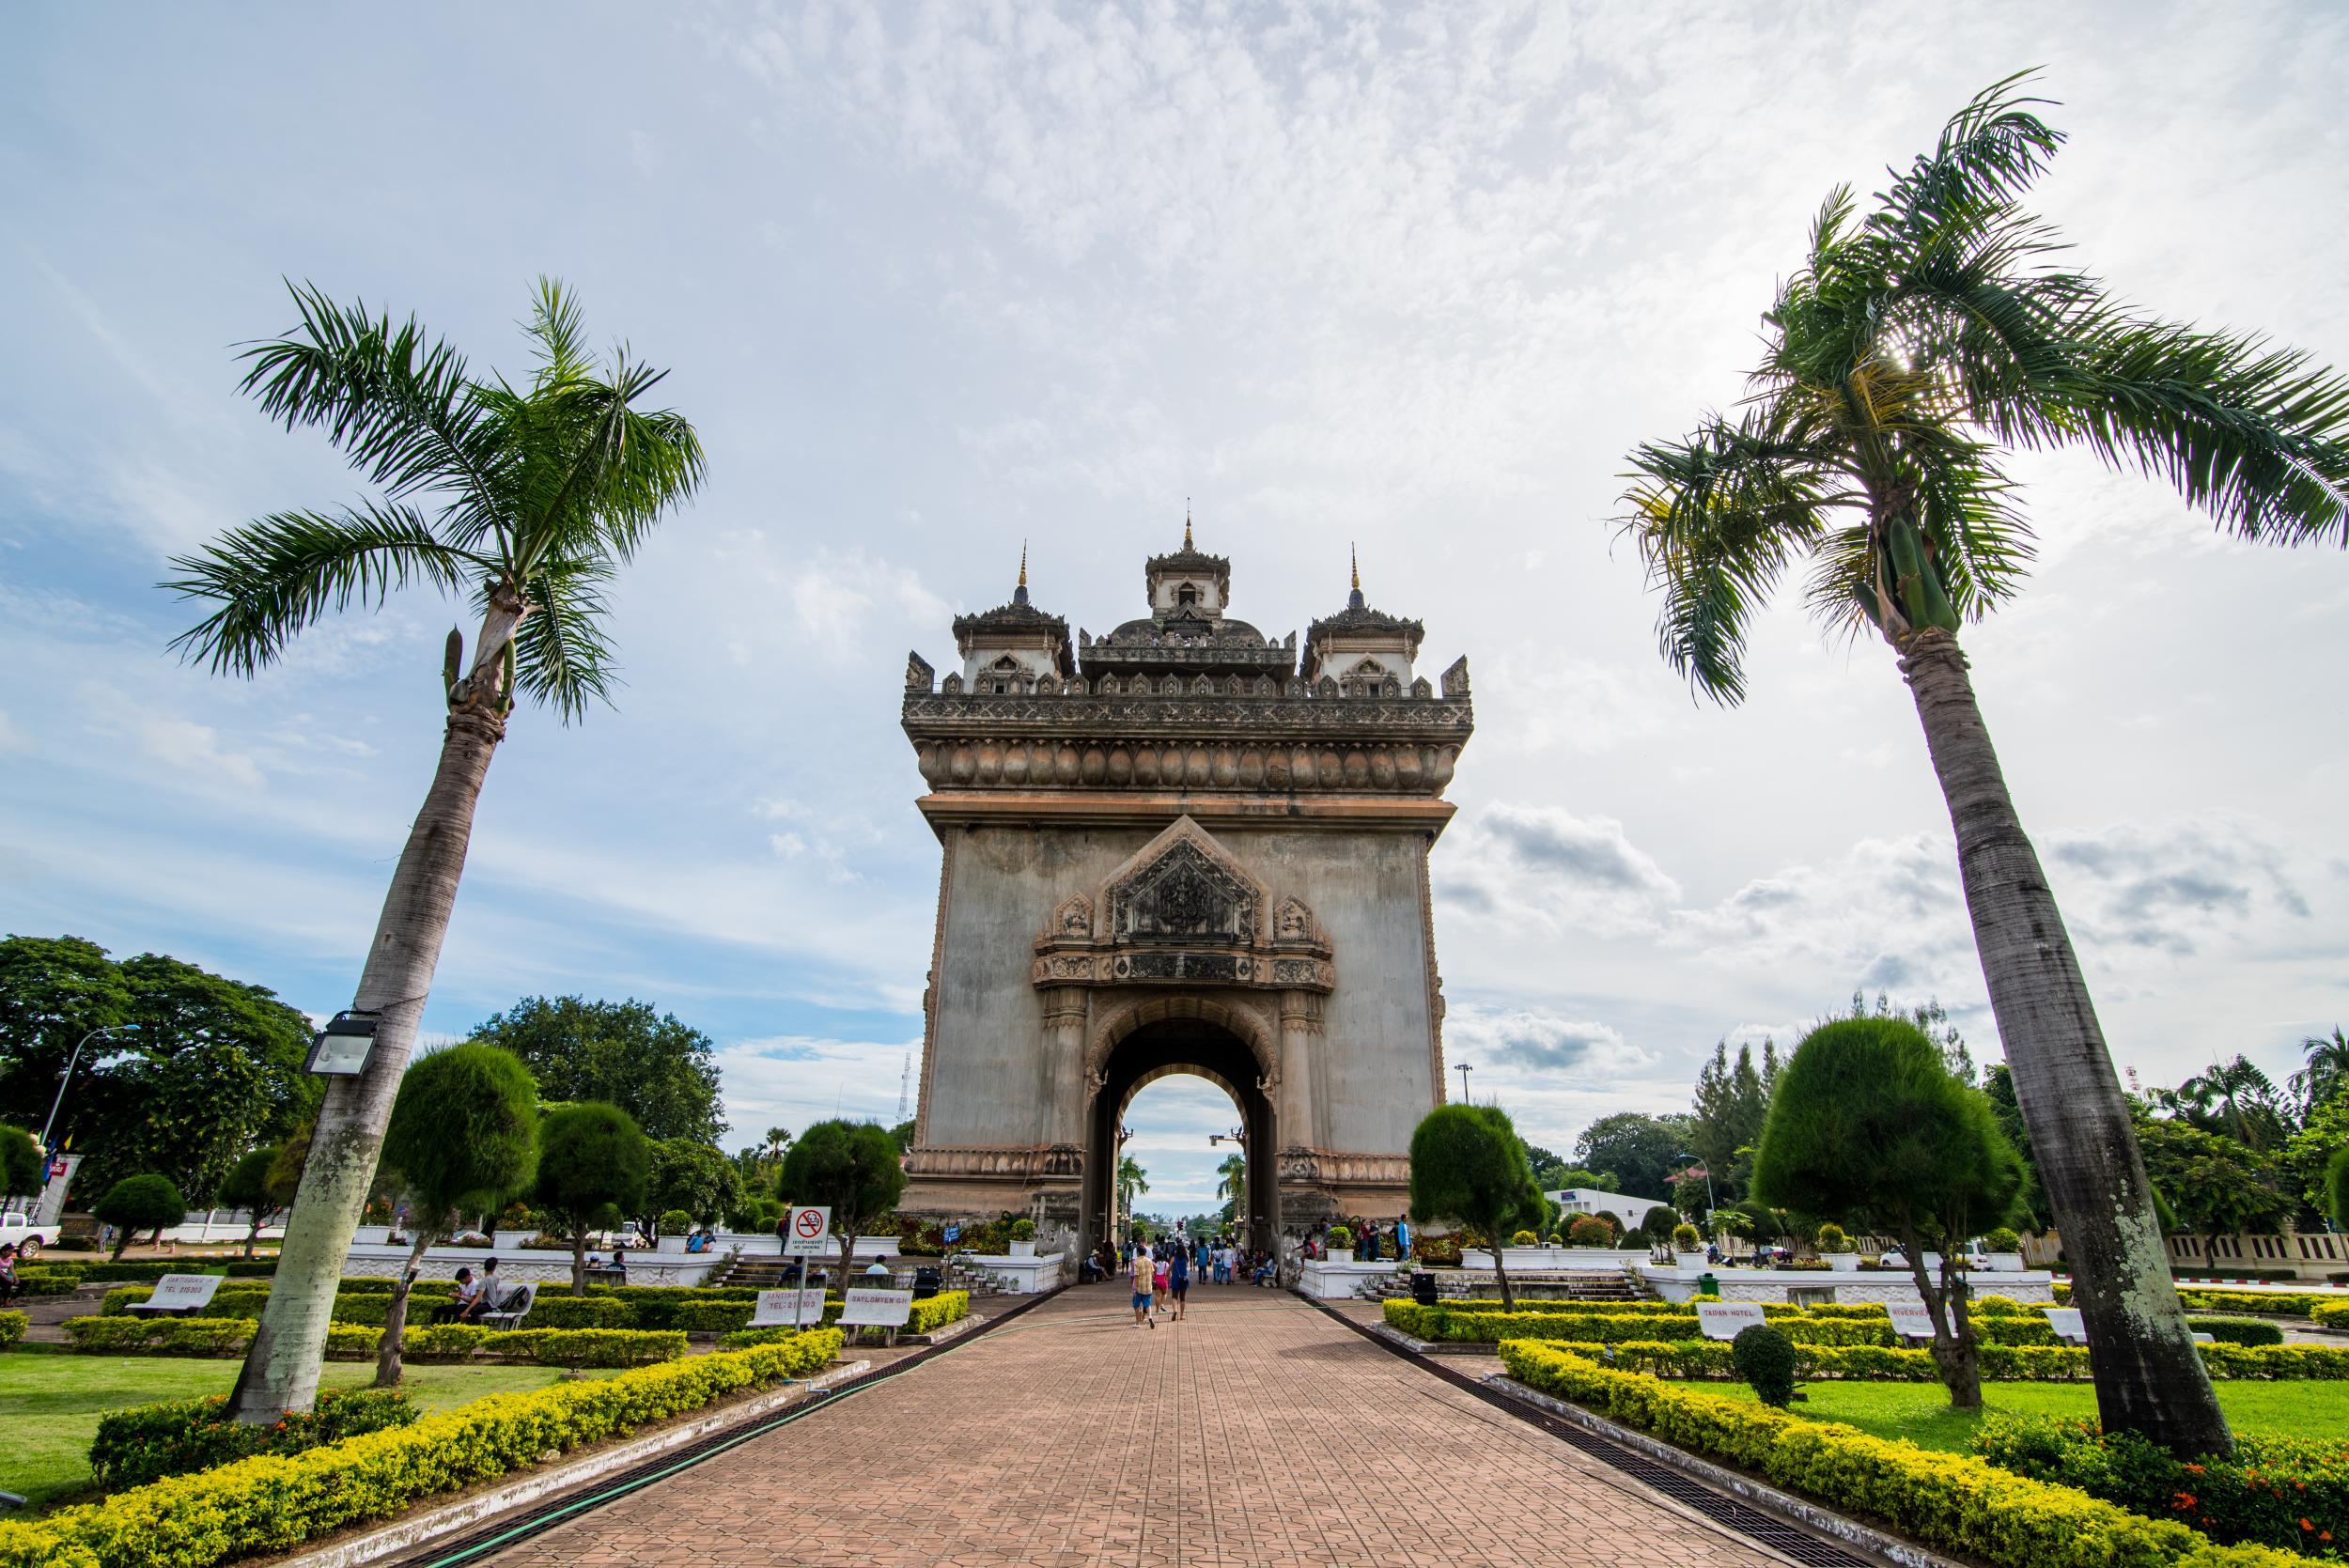 The Victory Gate, celebrating independence from France, in the capital Vientiane